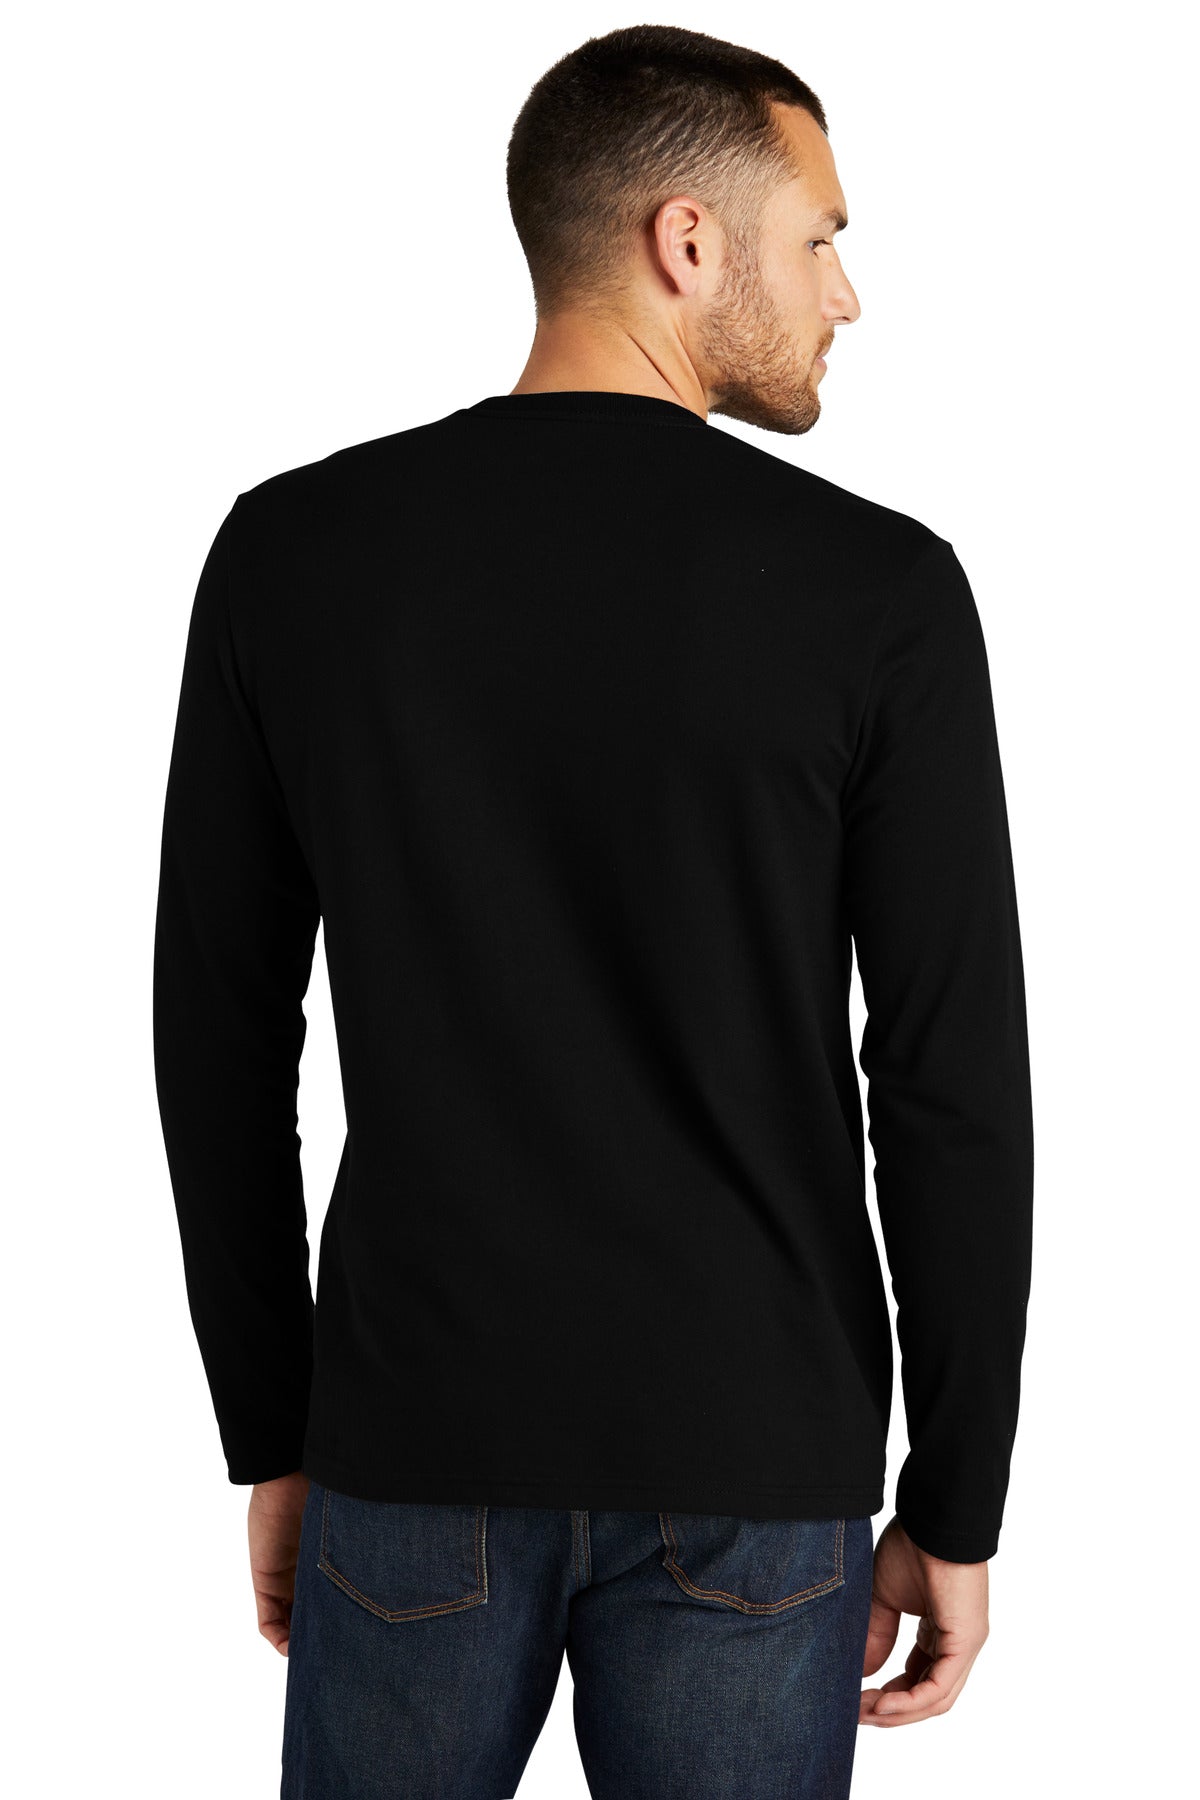 District® Re-Tee® Long Sleeve DT8003 - DFW Impression